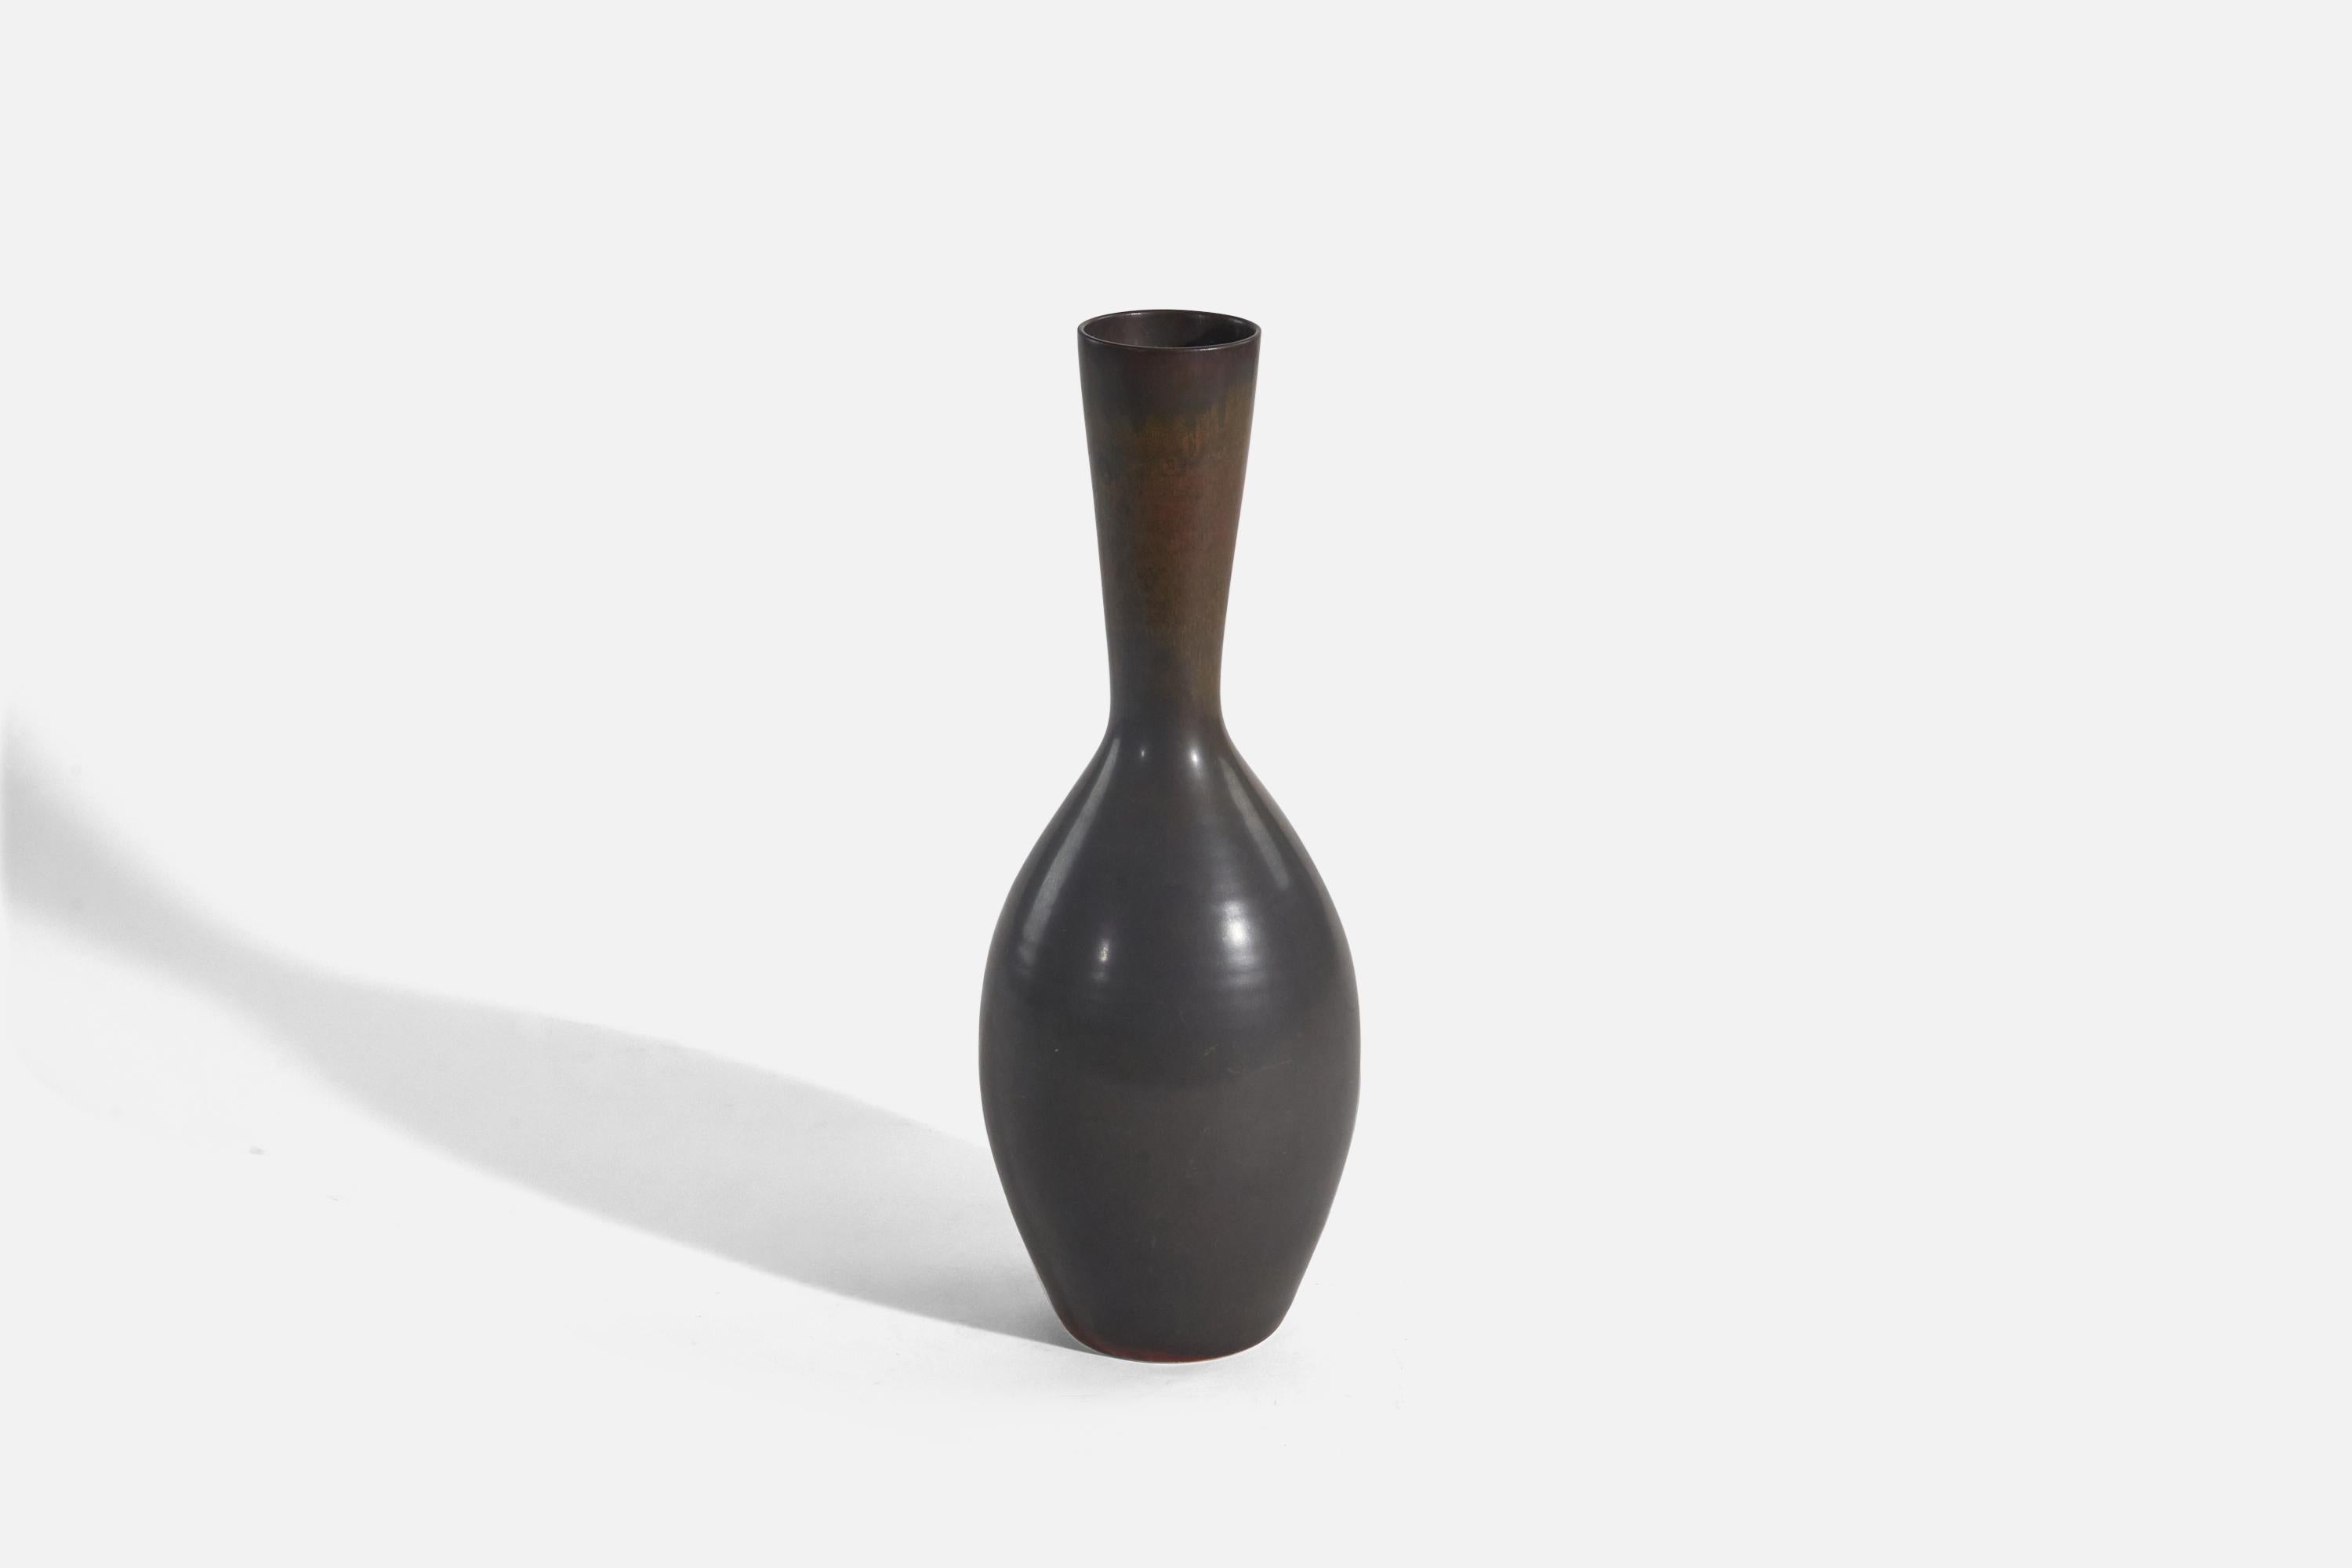 A brown and black, glazed stoneware vase designed by Carl-Harry Stålhane and produced by Rörstrand, Sweden, 1950s.